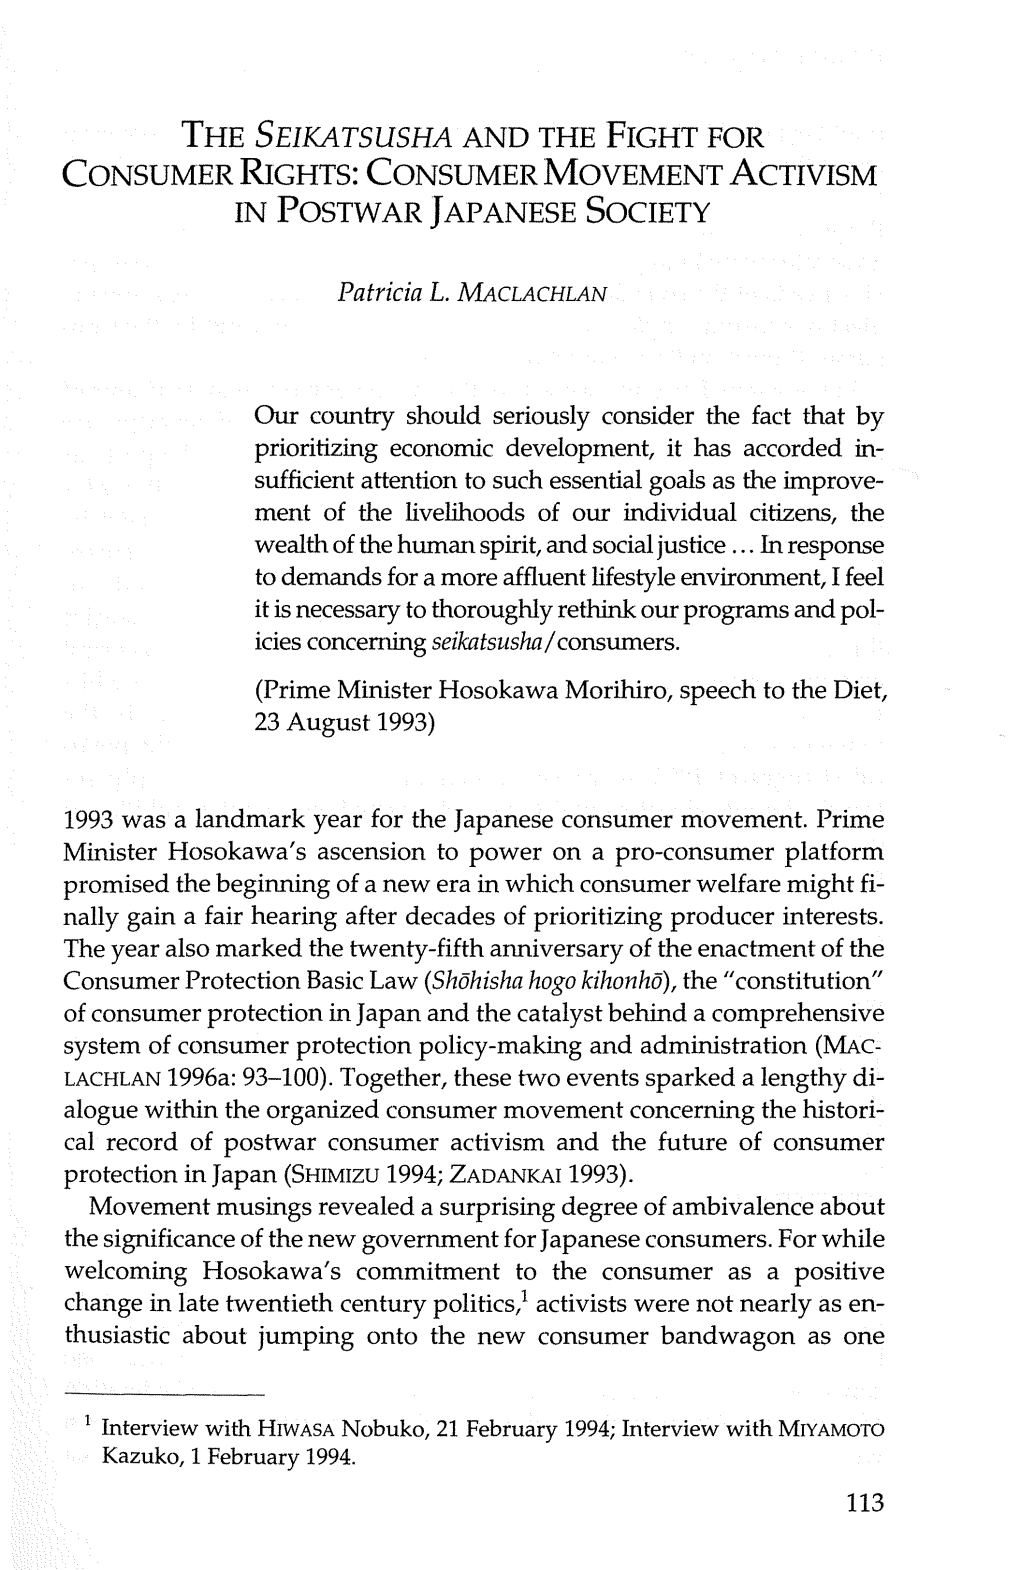 THE Selkatsusha and the FIGHT for CONSUMER RIGHTS: CONSUMER MOVEMENT ACTIVISM in POSTWAR JAPANESE SOCIETY